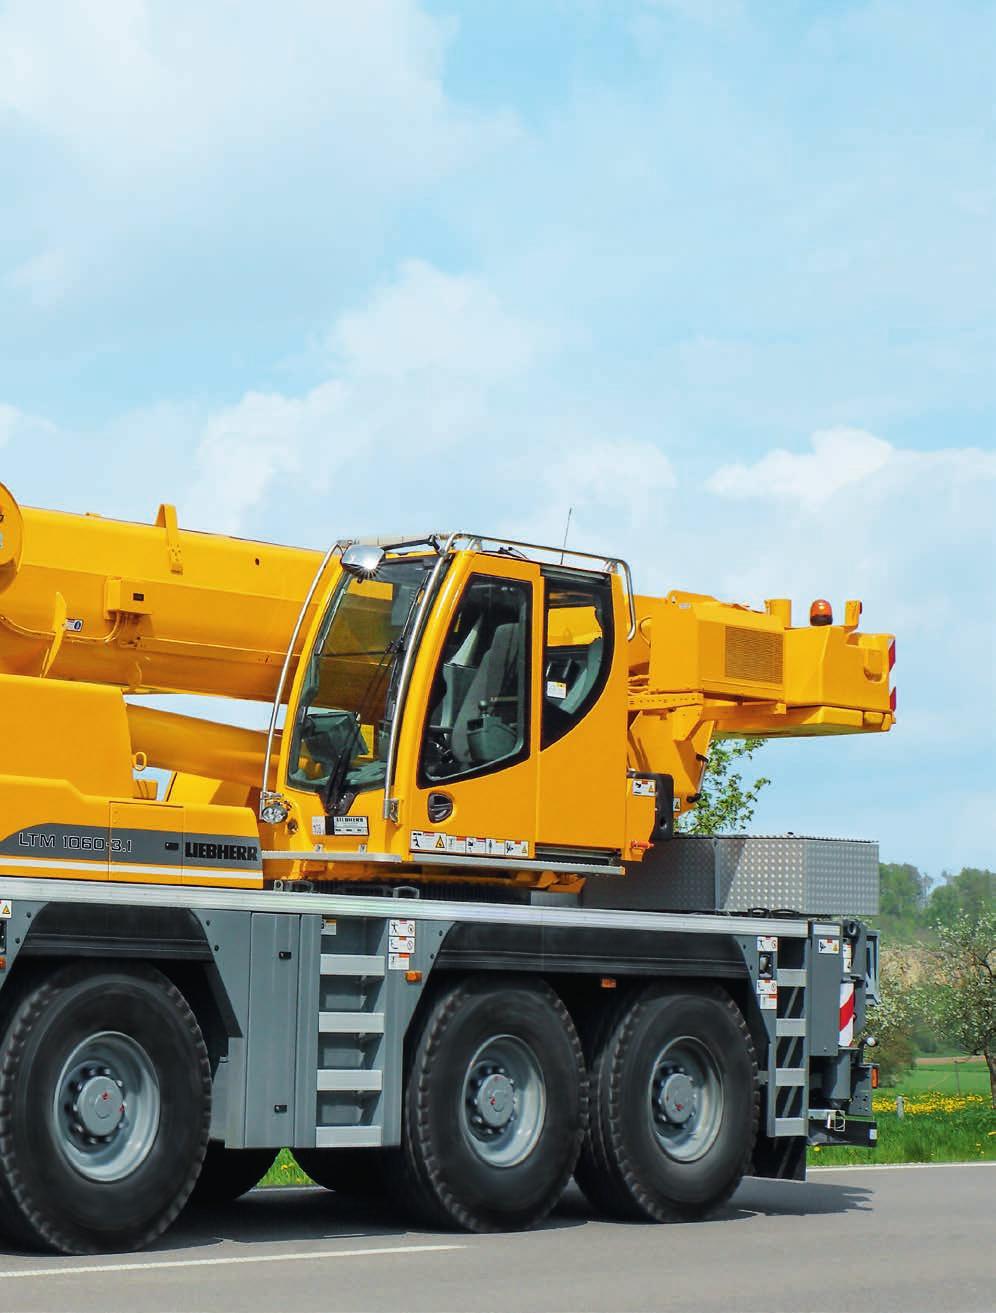 A long telescopic boom, high capacities, an extraordinary mobility as well as a comprehensive comfort and safety configuration distinguish the mobile crane LTM 1060-3.1 from Liebherr.